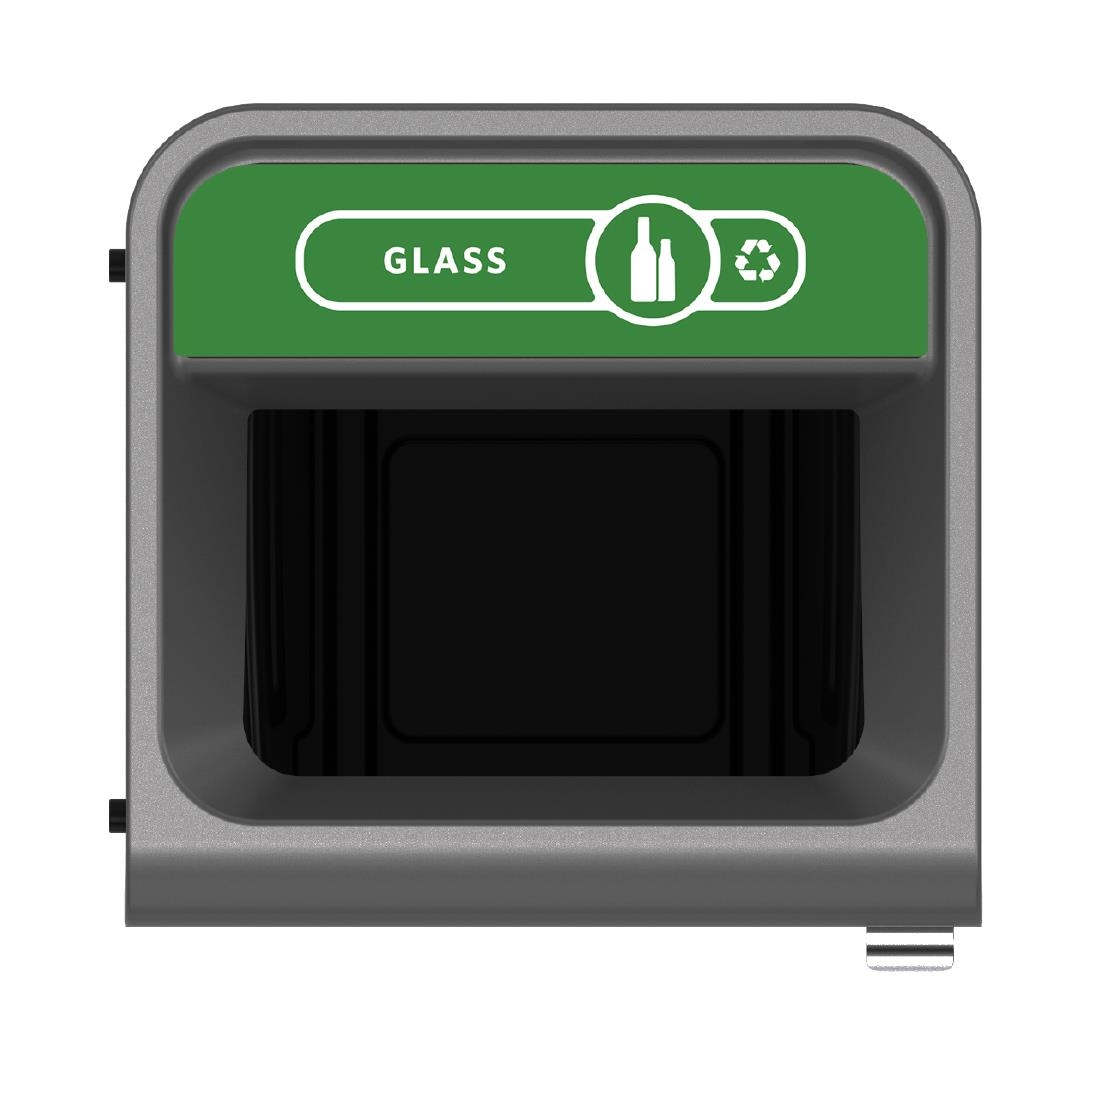 Rubbermaid Configure Recycling Bin with Glass Recycling Label Green 87Ltr (CX967)